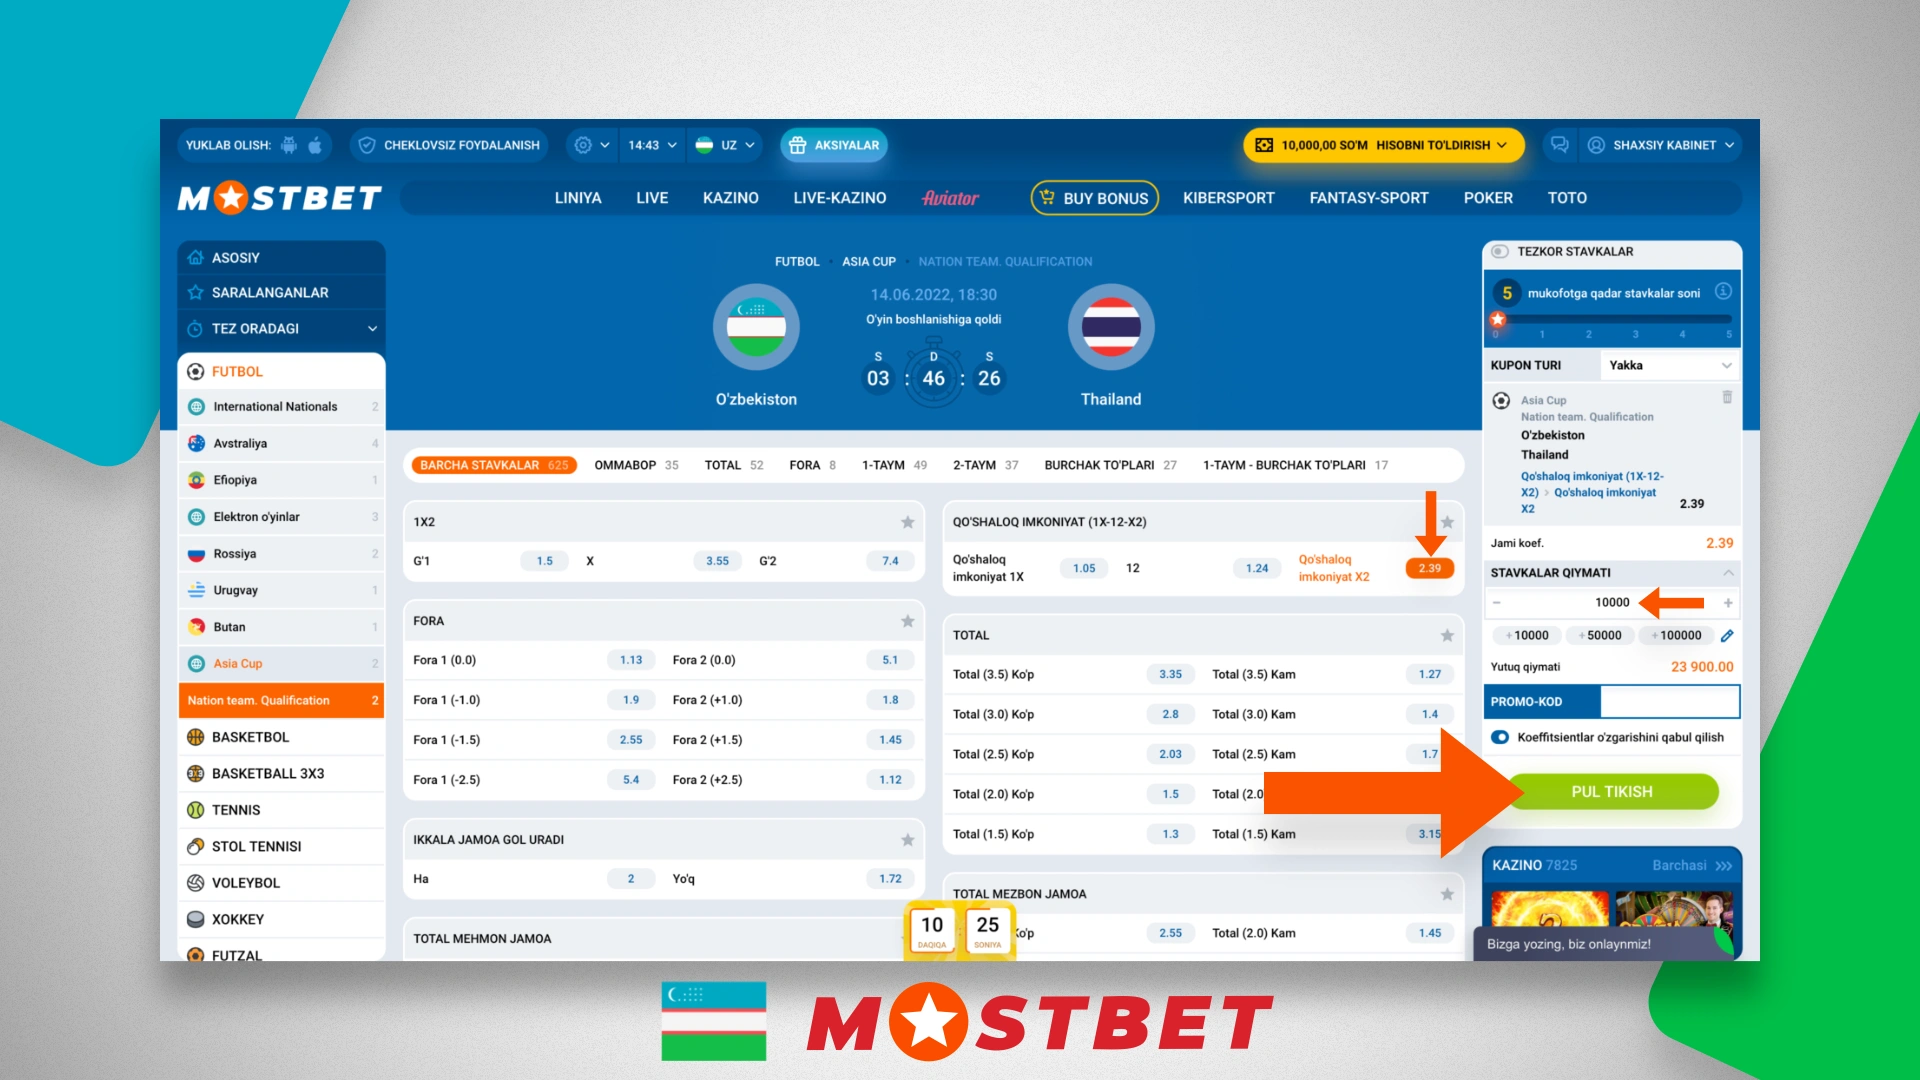 A step-by-step guide on how to bet on the Mostbet Uzbekistan website